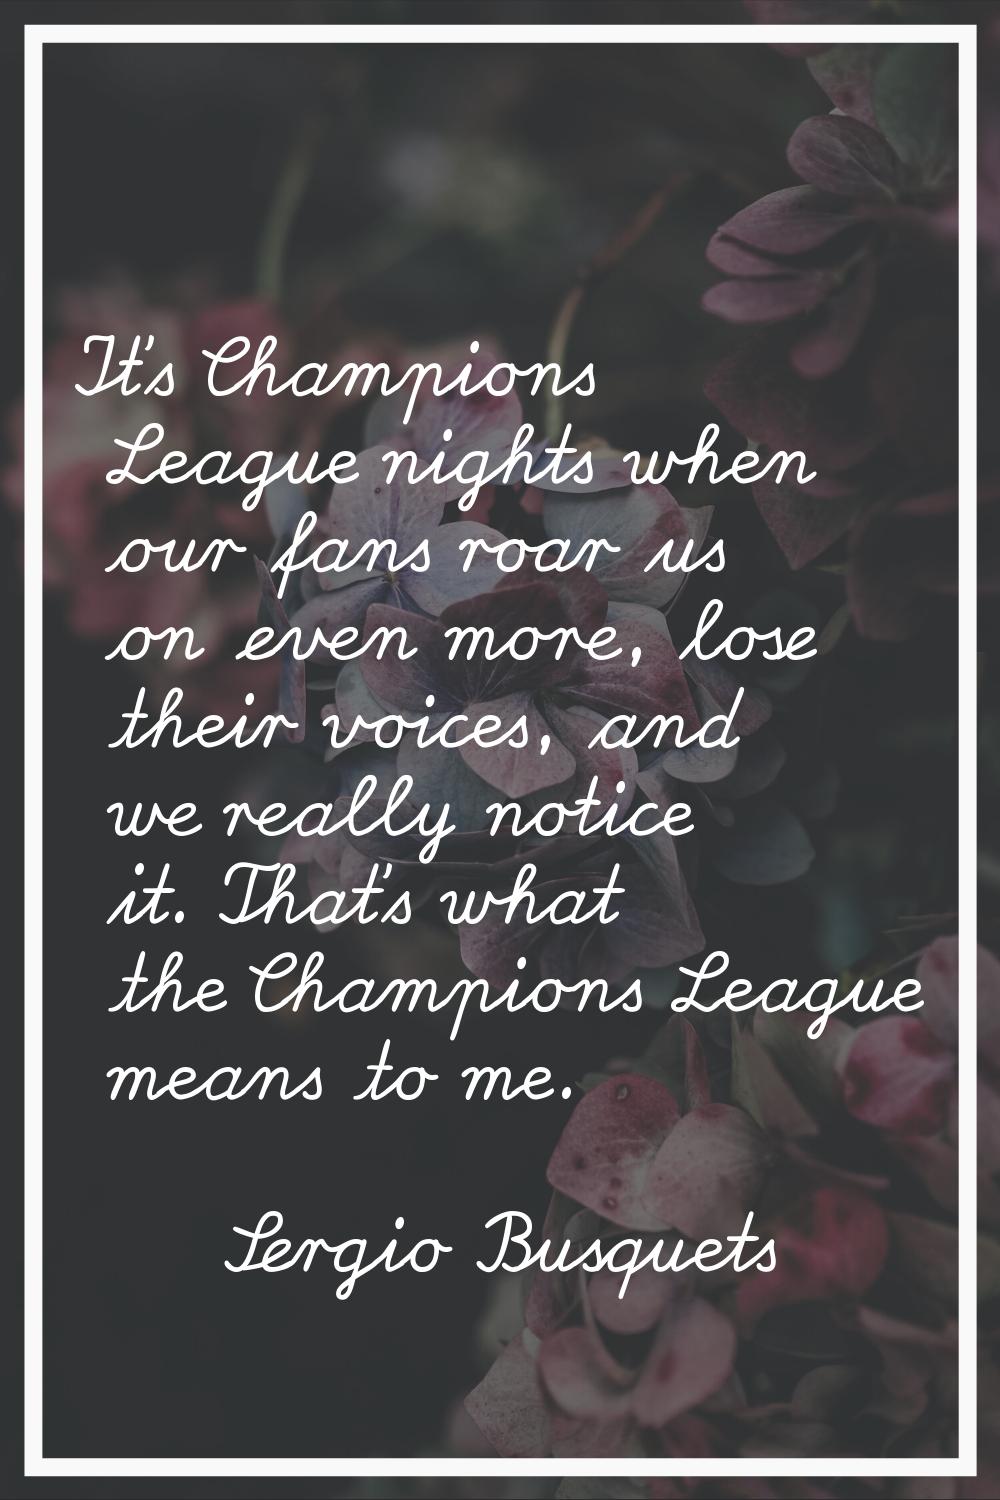 It's Champions League nights when our fans roar us on even more, lose their voices, and we really n